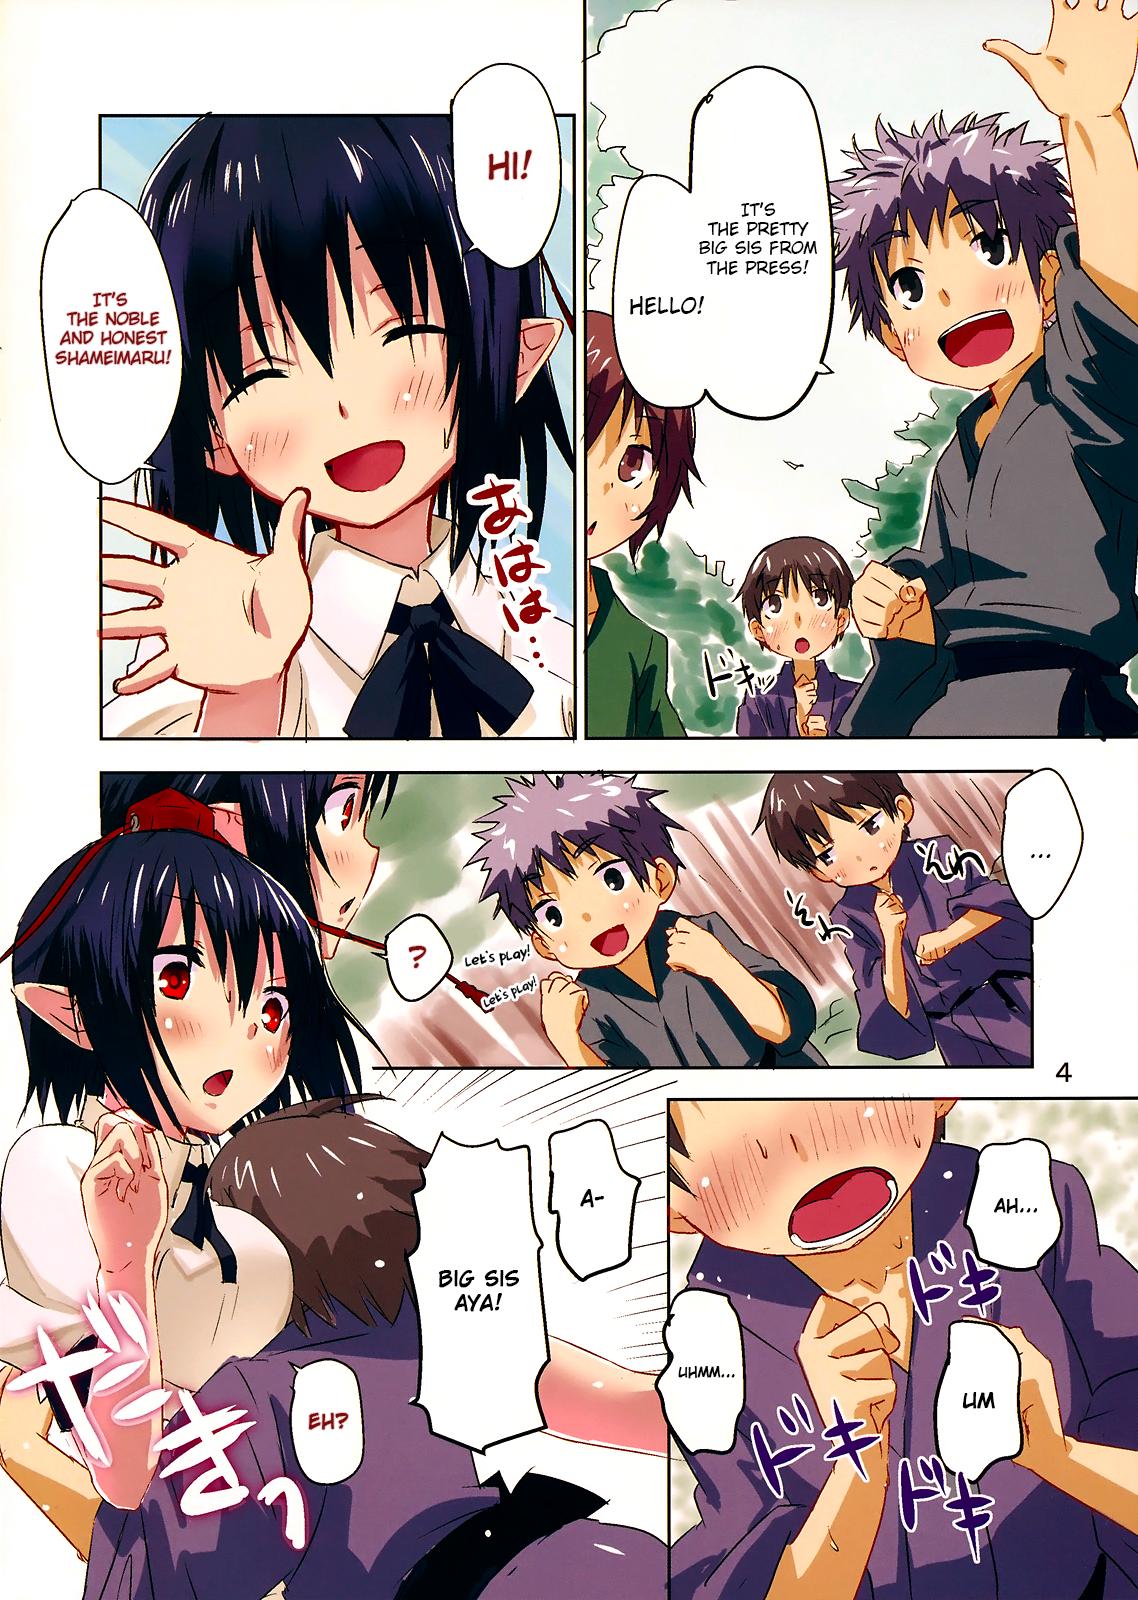 Blowing NEWS DAILY EXTRA - Touhou project Sexy Whores - Page 3